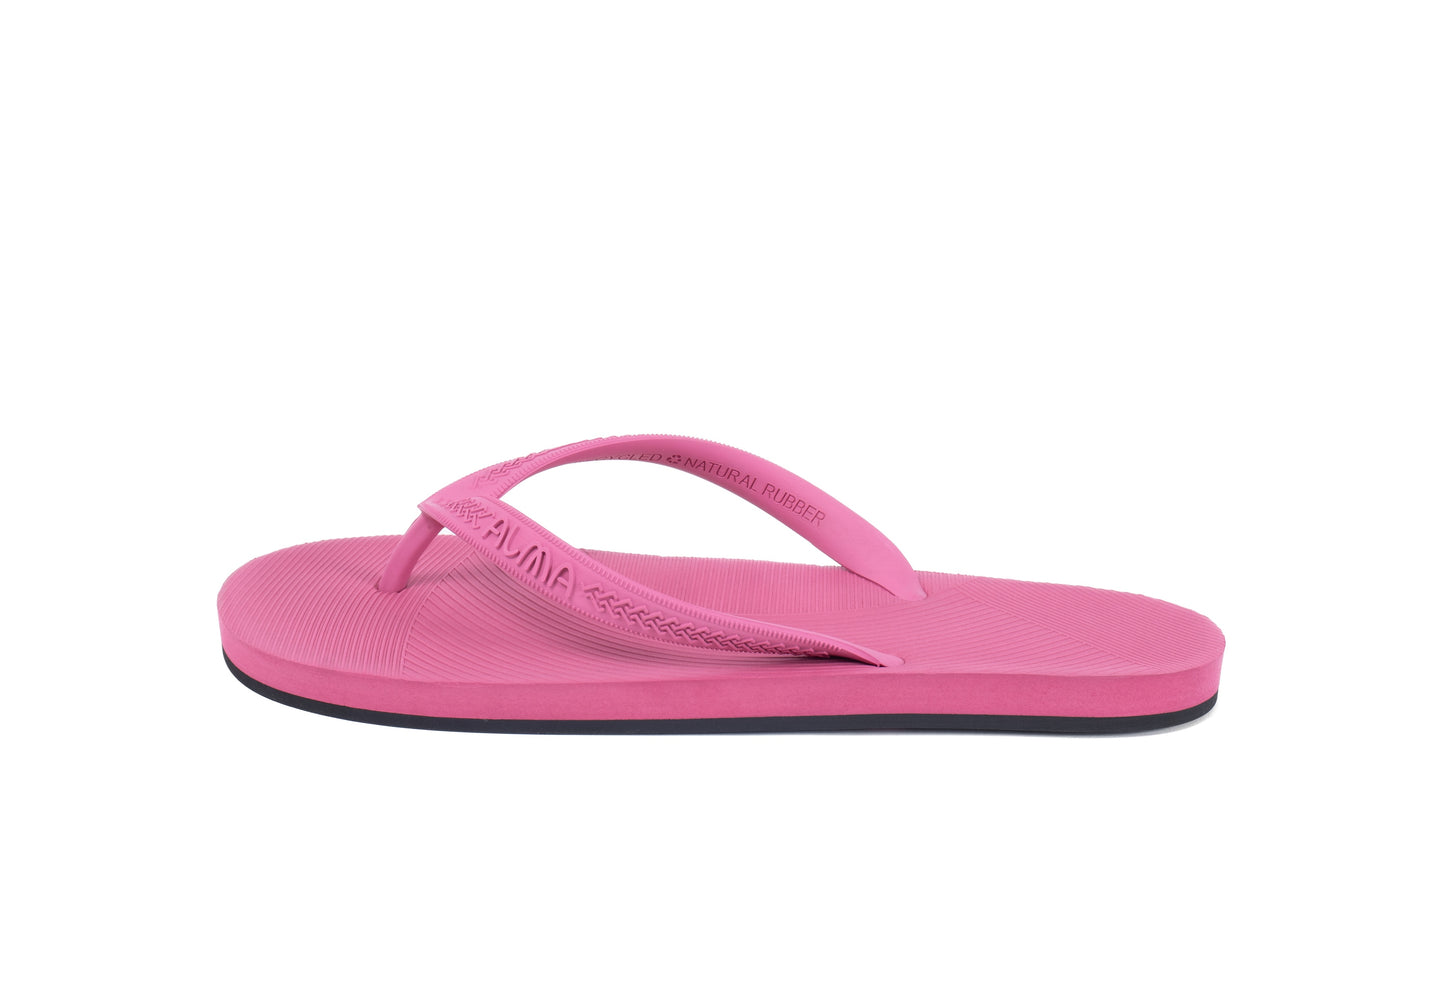 Men's Recycled Tire Sole Flip Flop - Rose